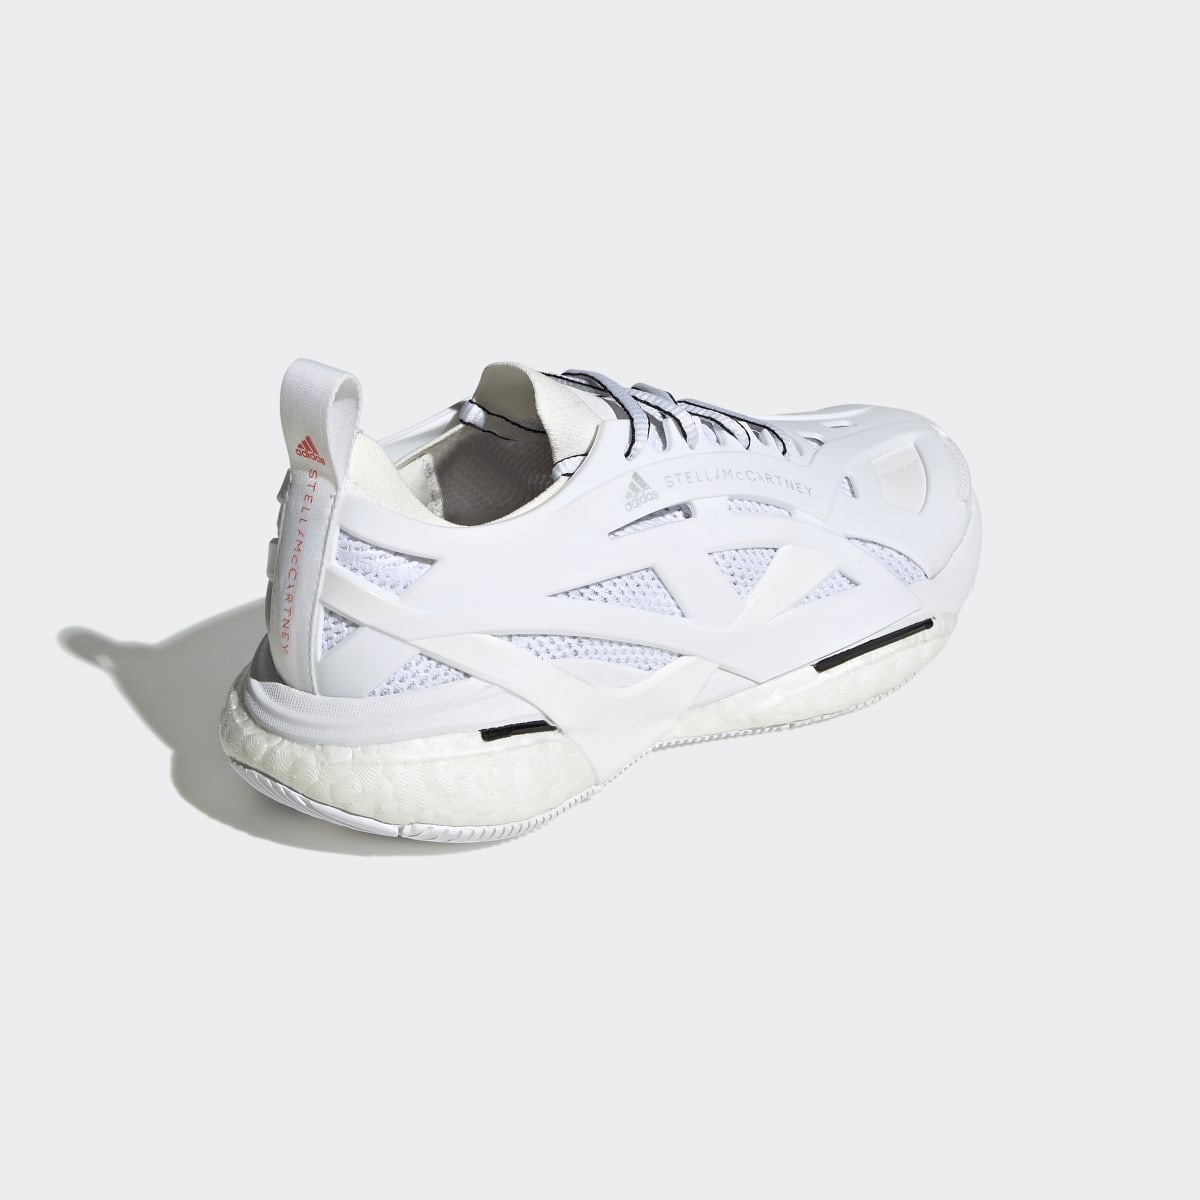 Adidas by Stella McCartney Solarglide Shoes. 6